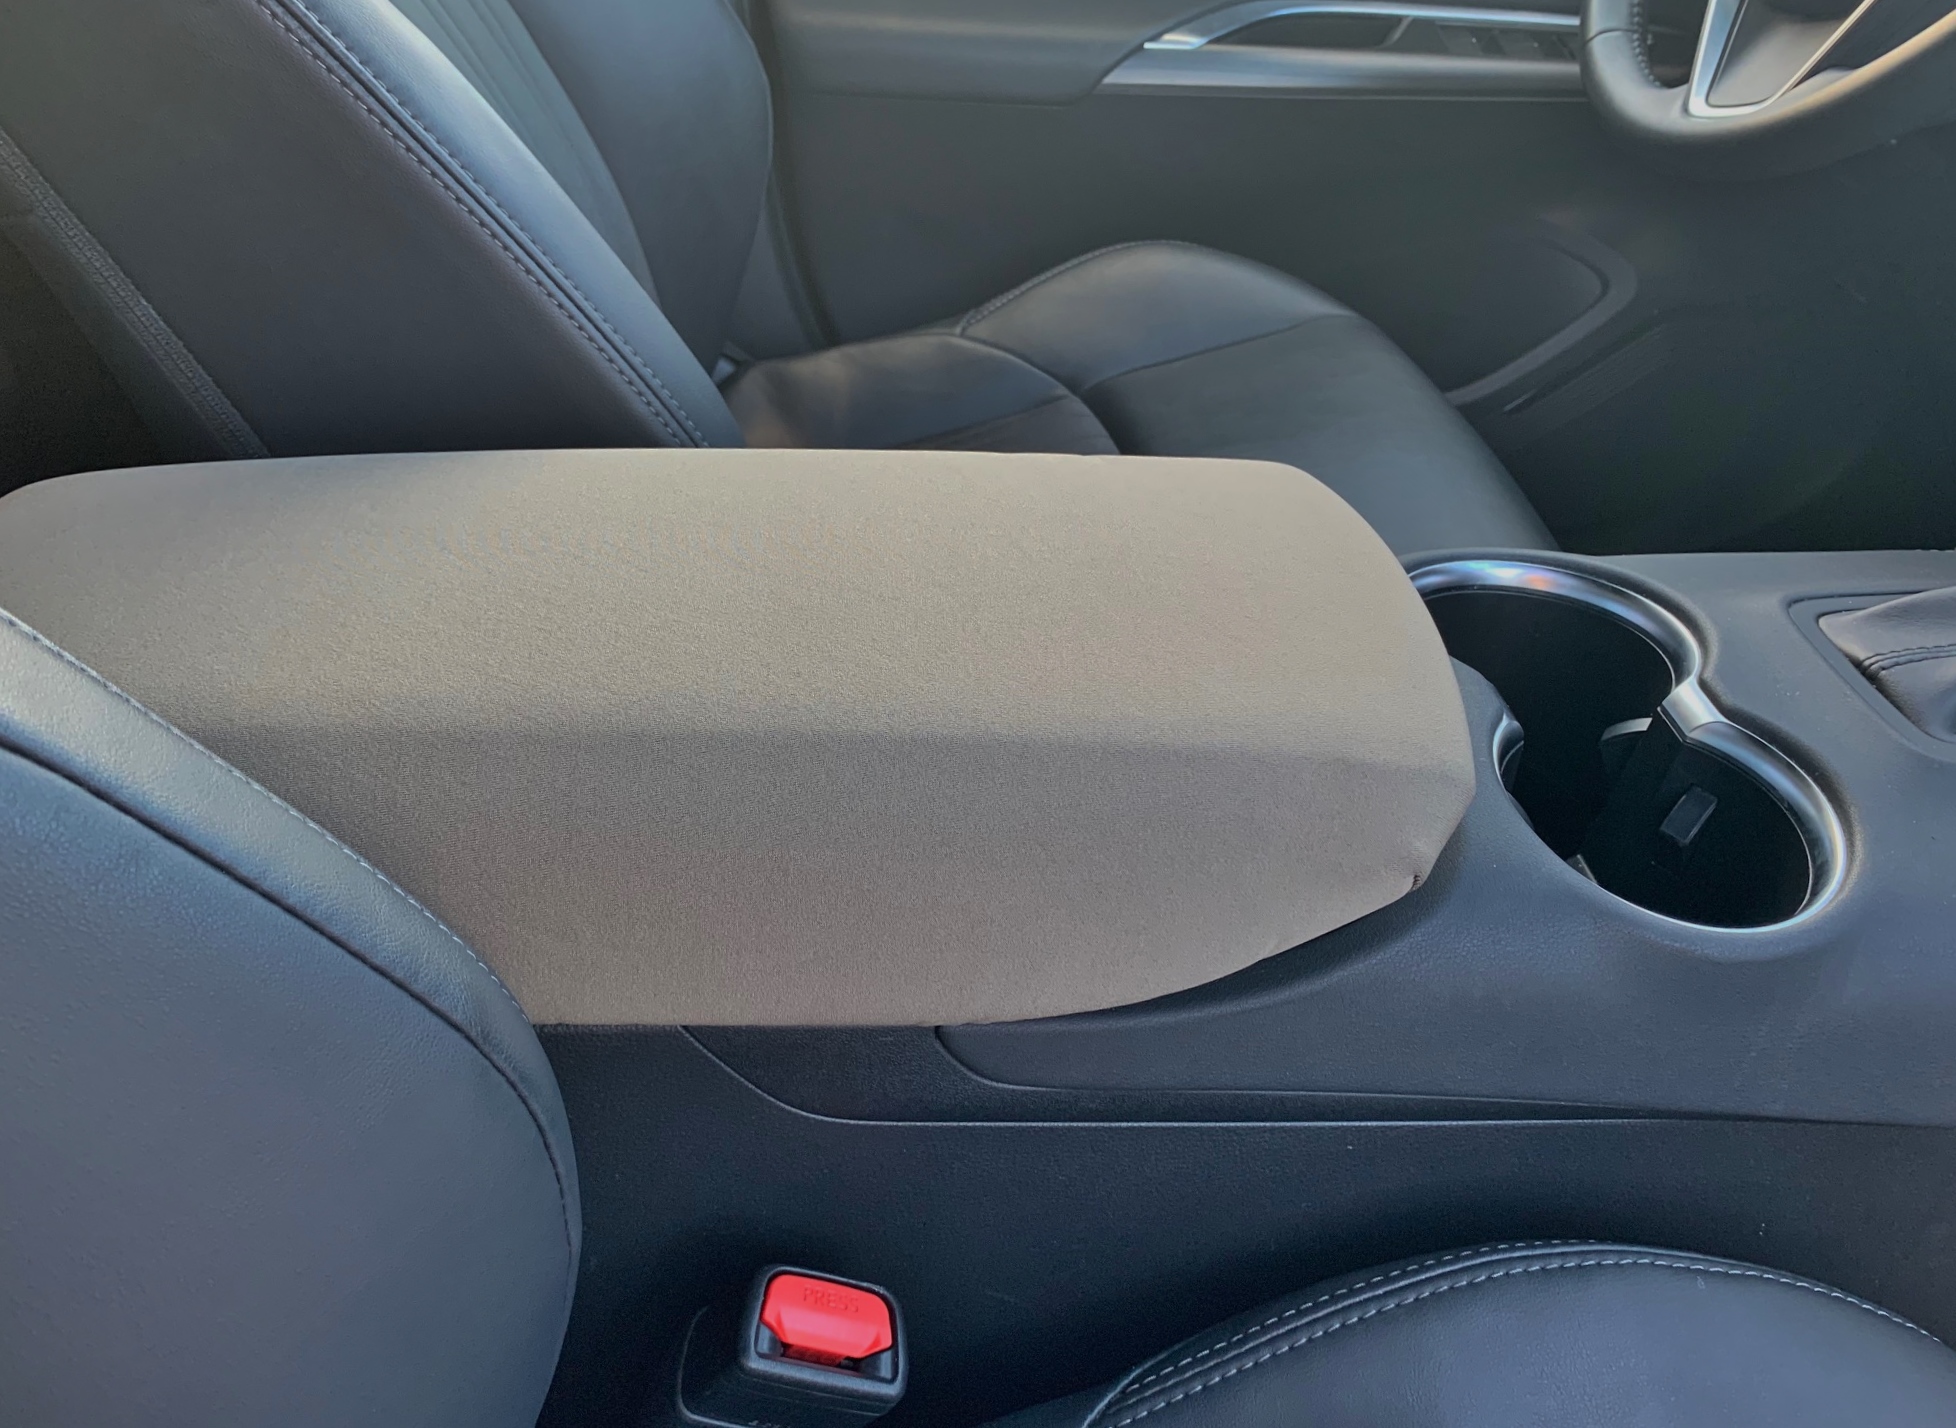 Buy Neoprene Center Console Armrest Cover - Fits the Toyota Venza 2021-2022